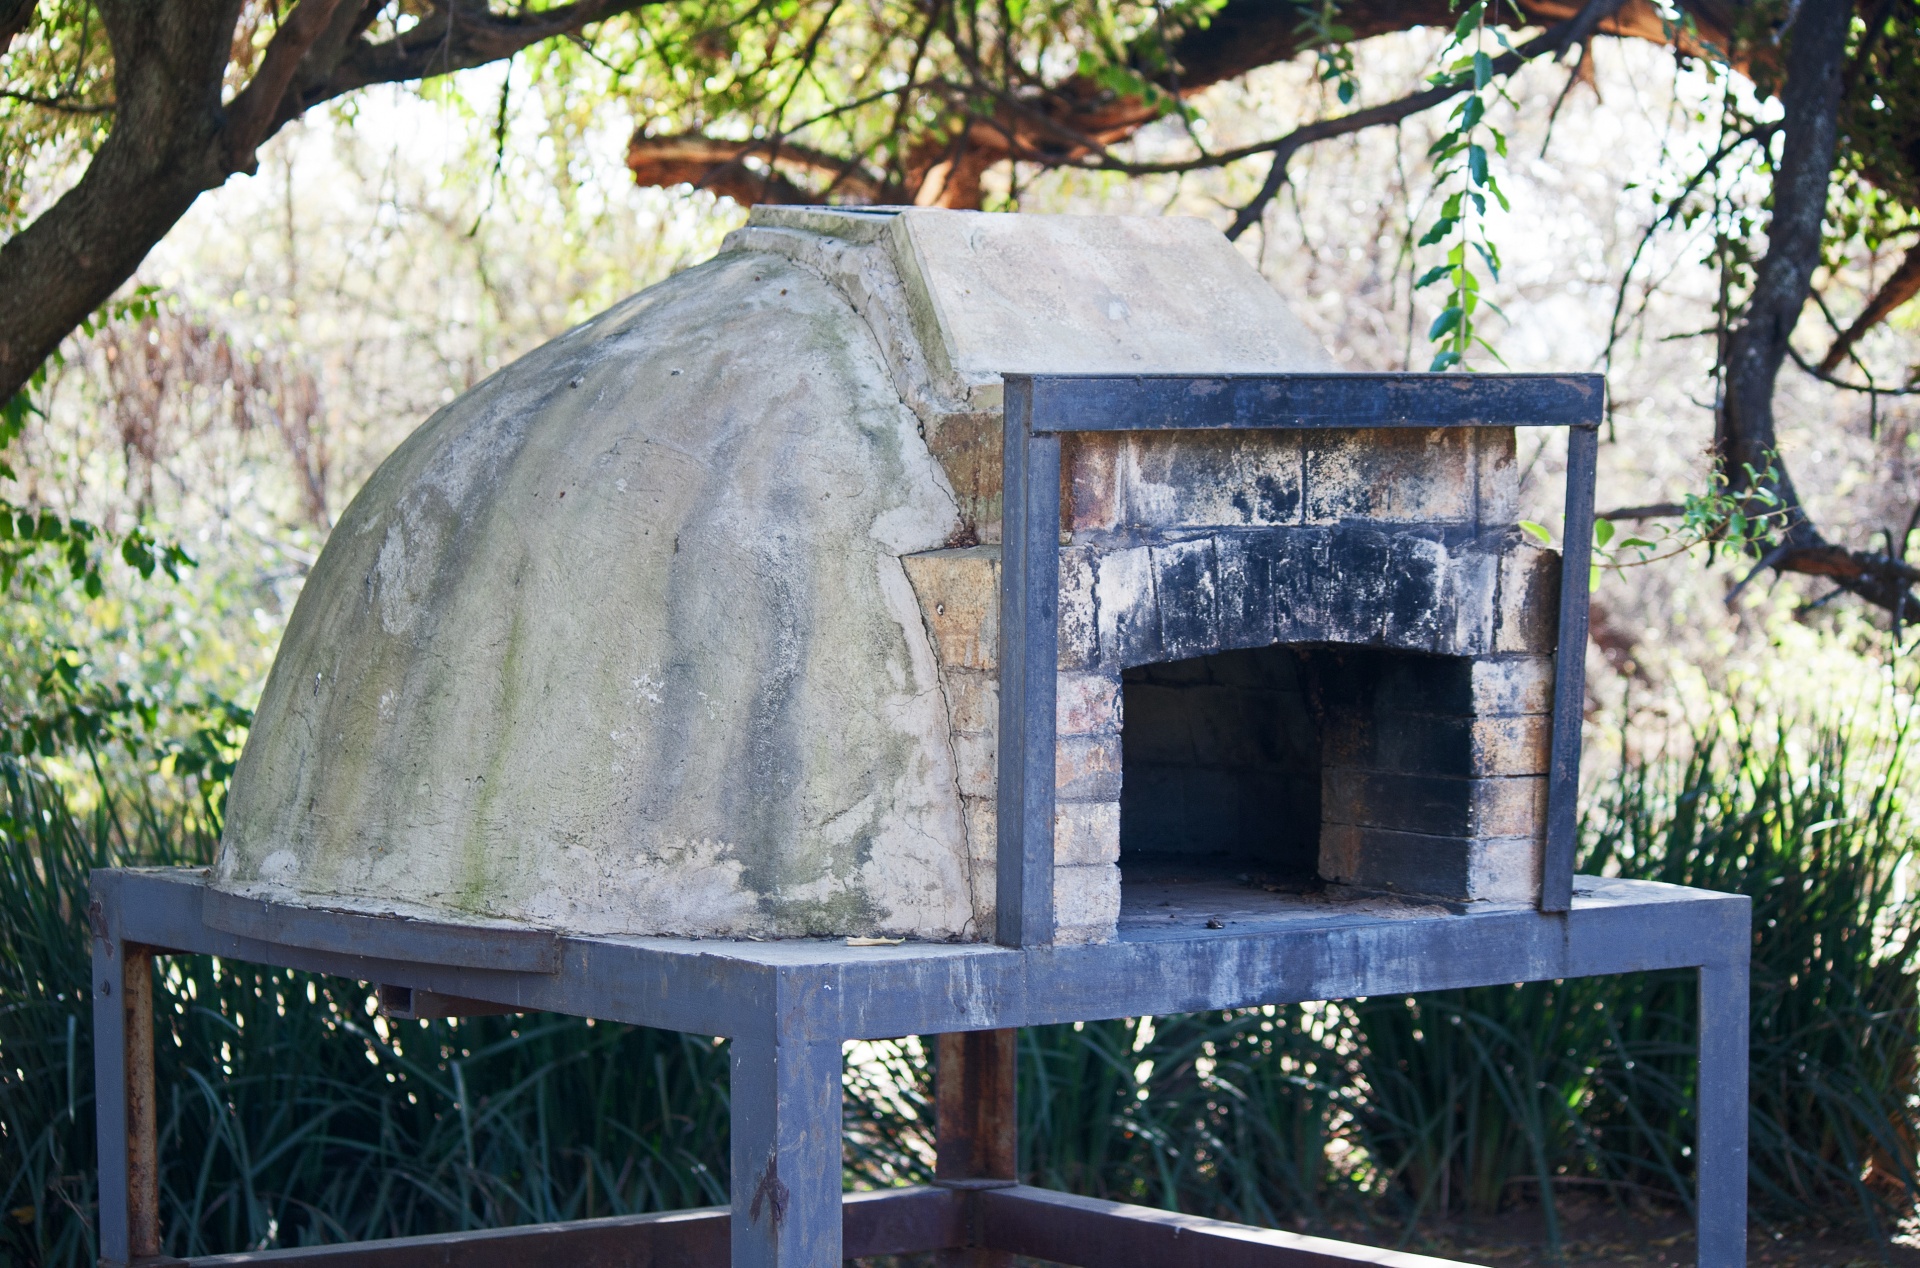 view of an outdoors pizza oven under a tree